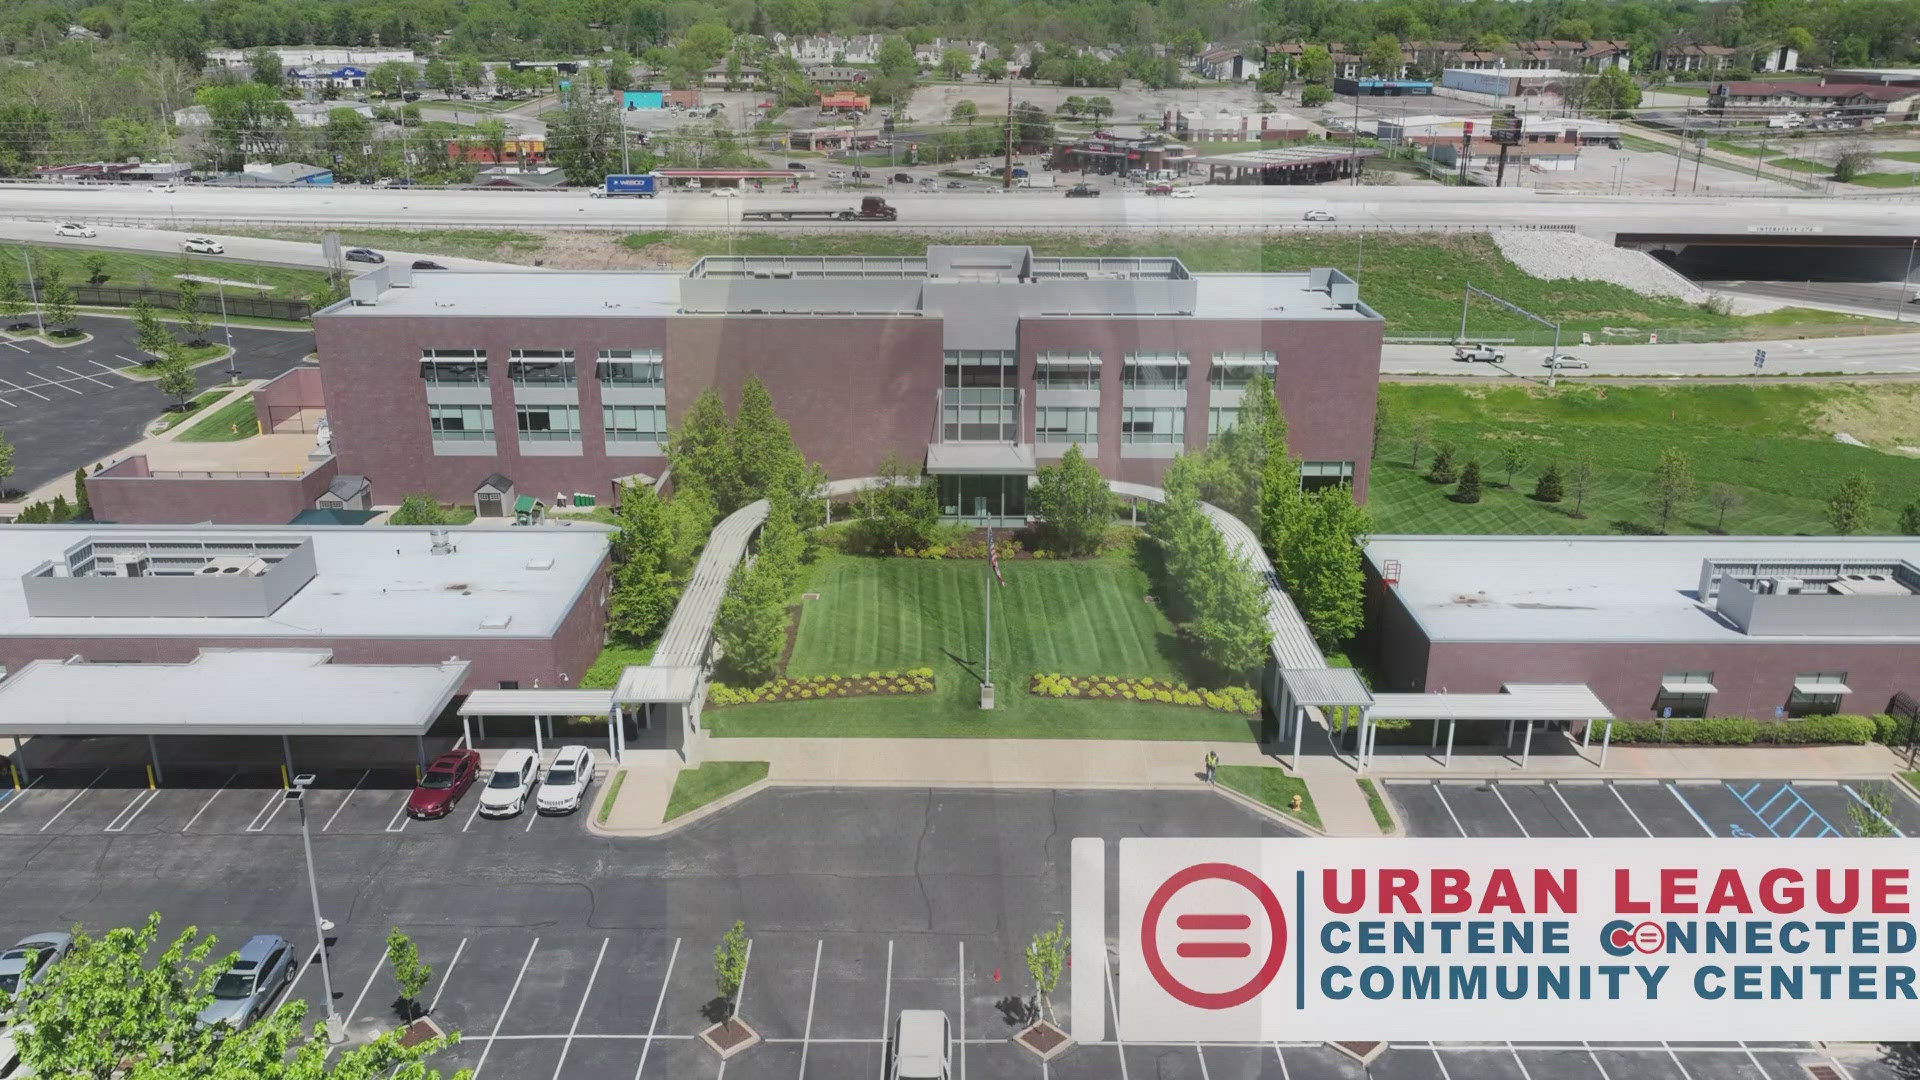 New reaction after a major announcement in Ferguson. The Urban League received its largest building donation in history from the Centene Corporation.